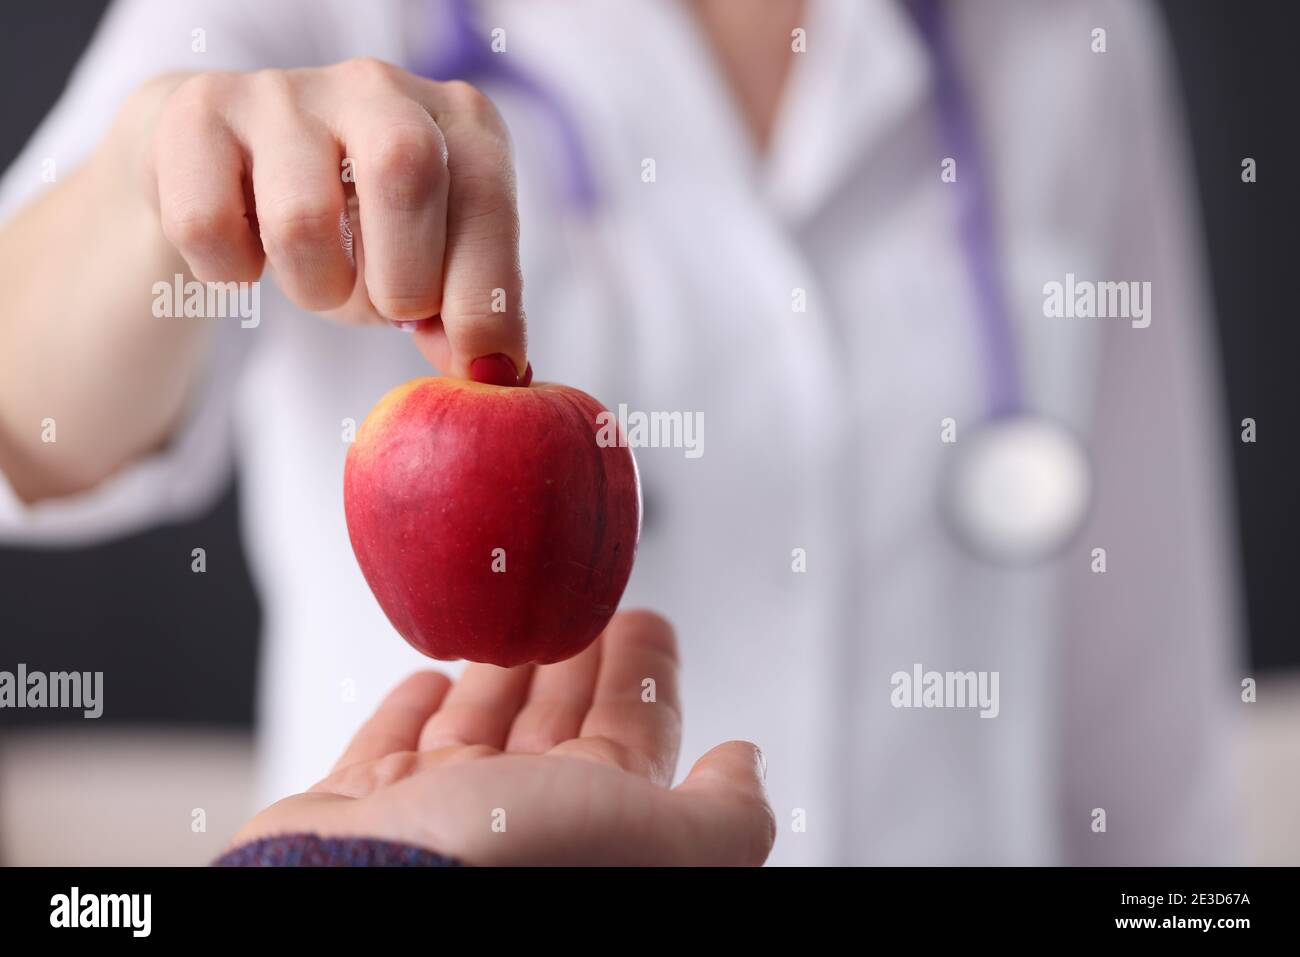 Doctor hands over a ripe apple to the patient. Anti-aging treatments Stock Photo